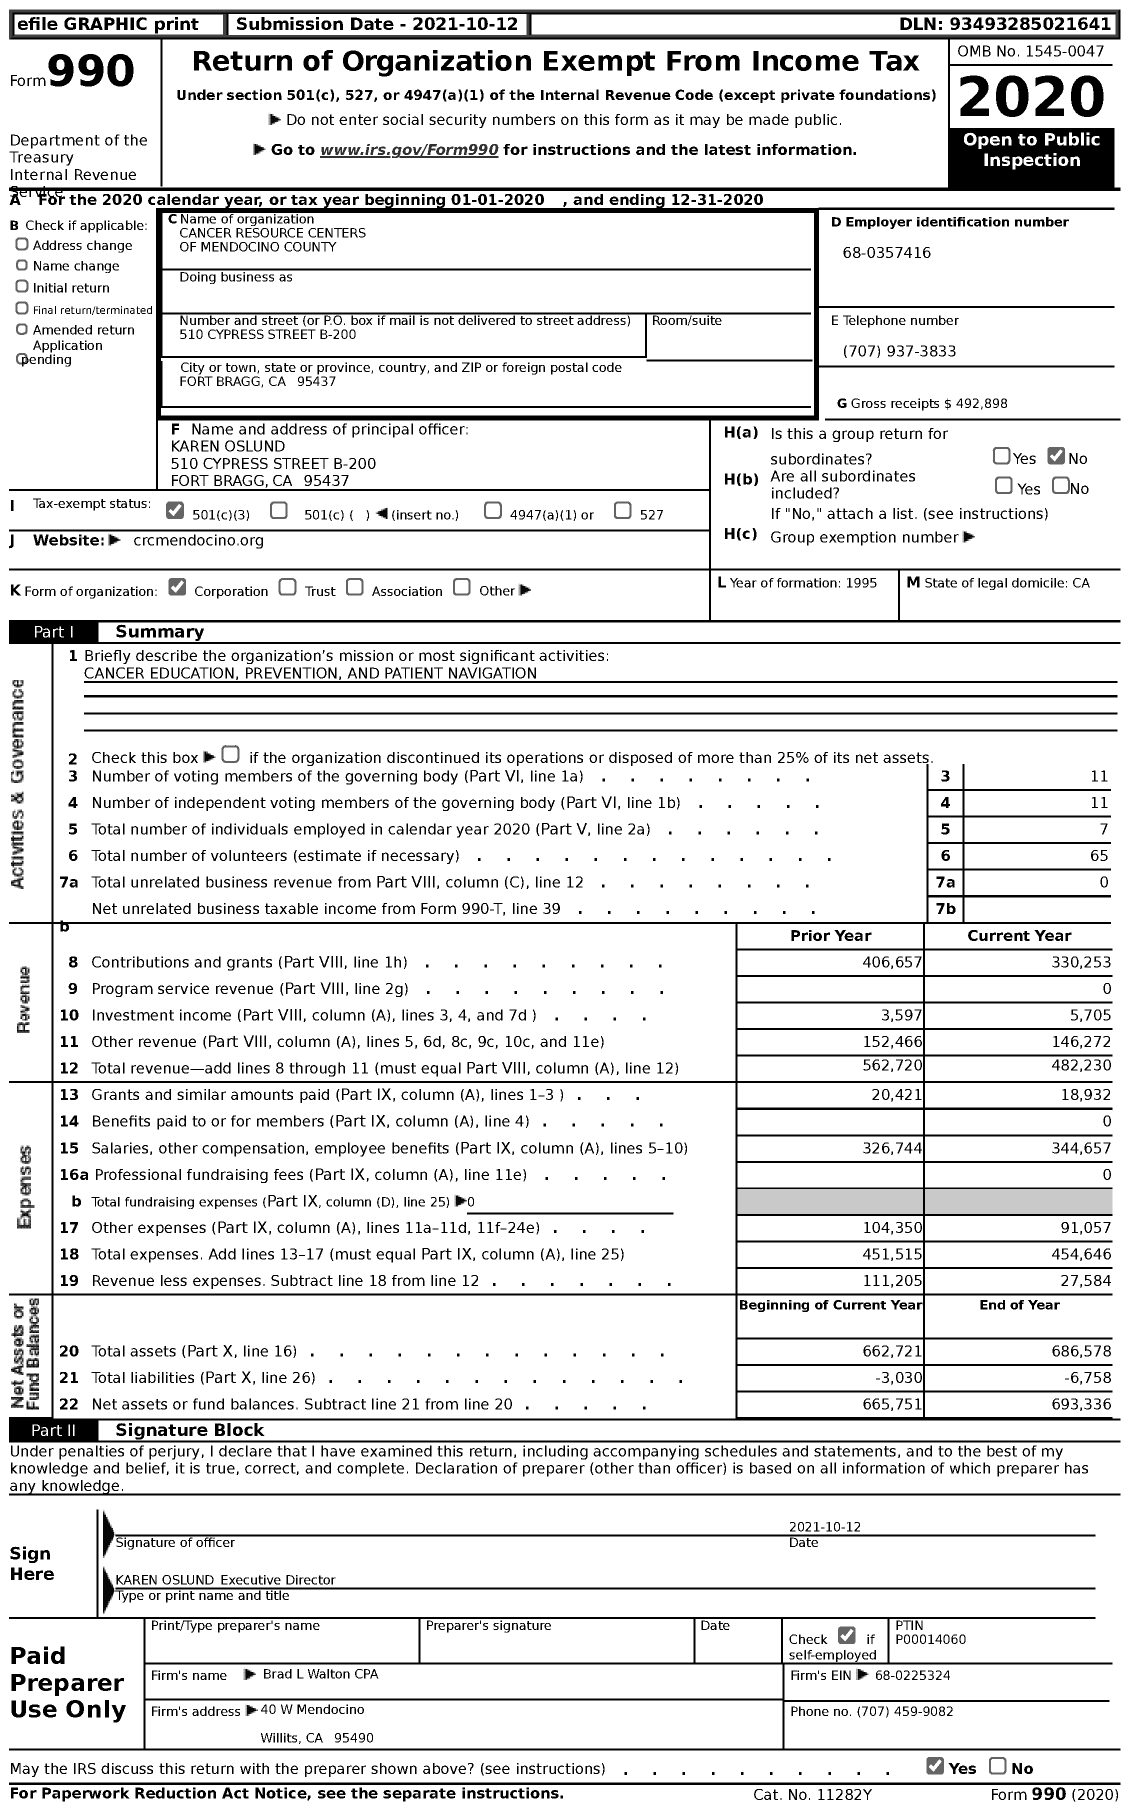 Image of first page of 2020 Form 990 for Cancer Resource Centers of Mendocino County